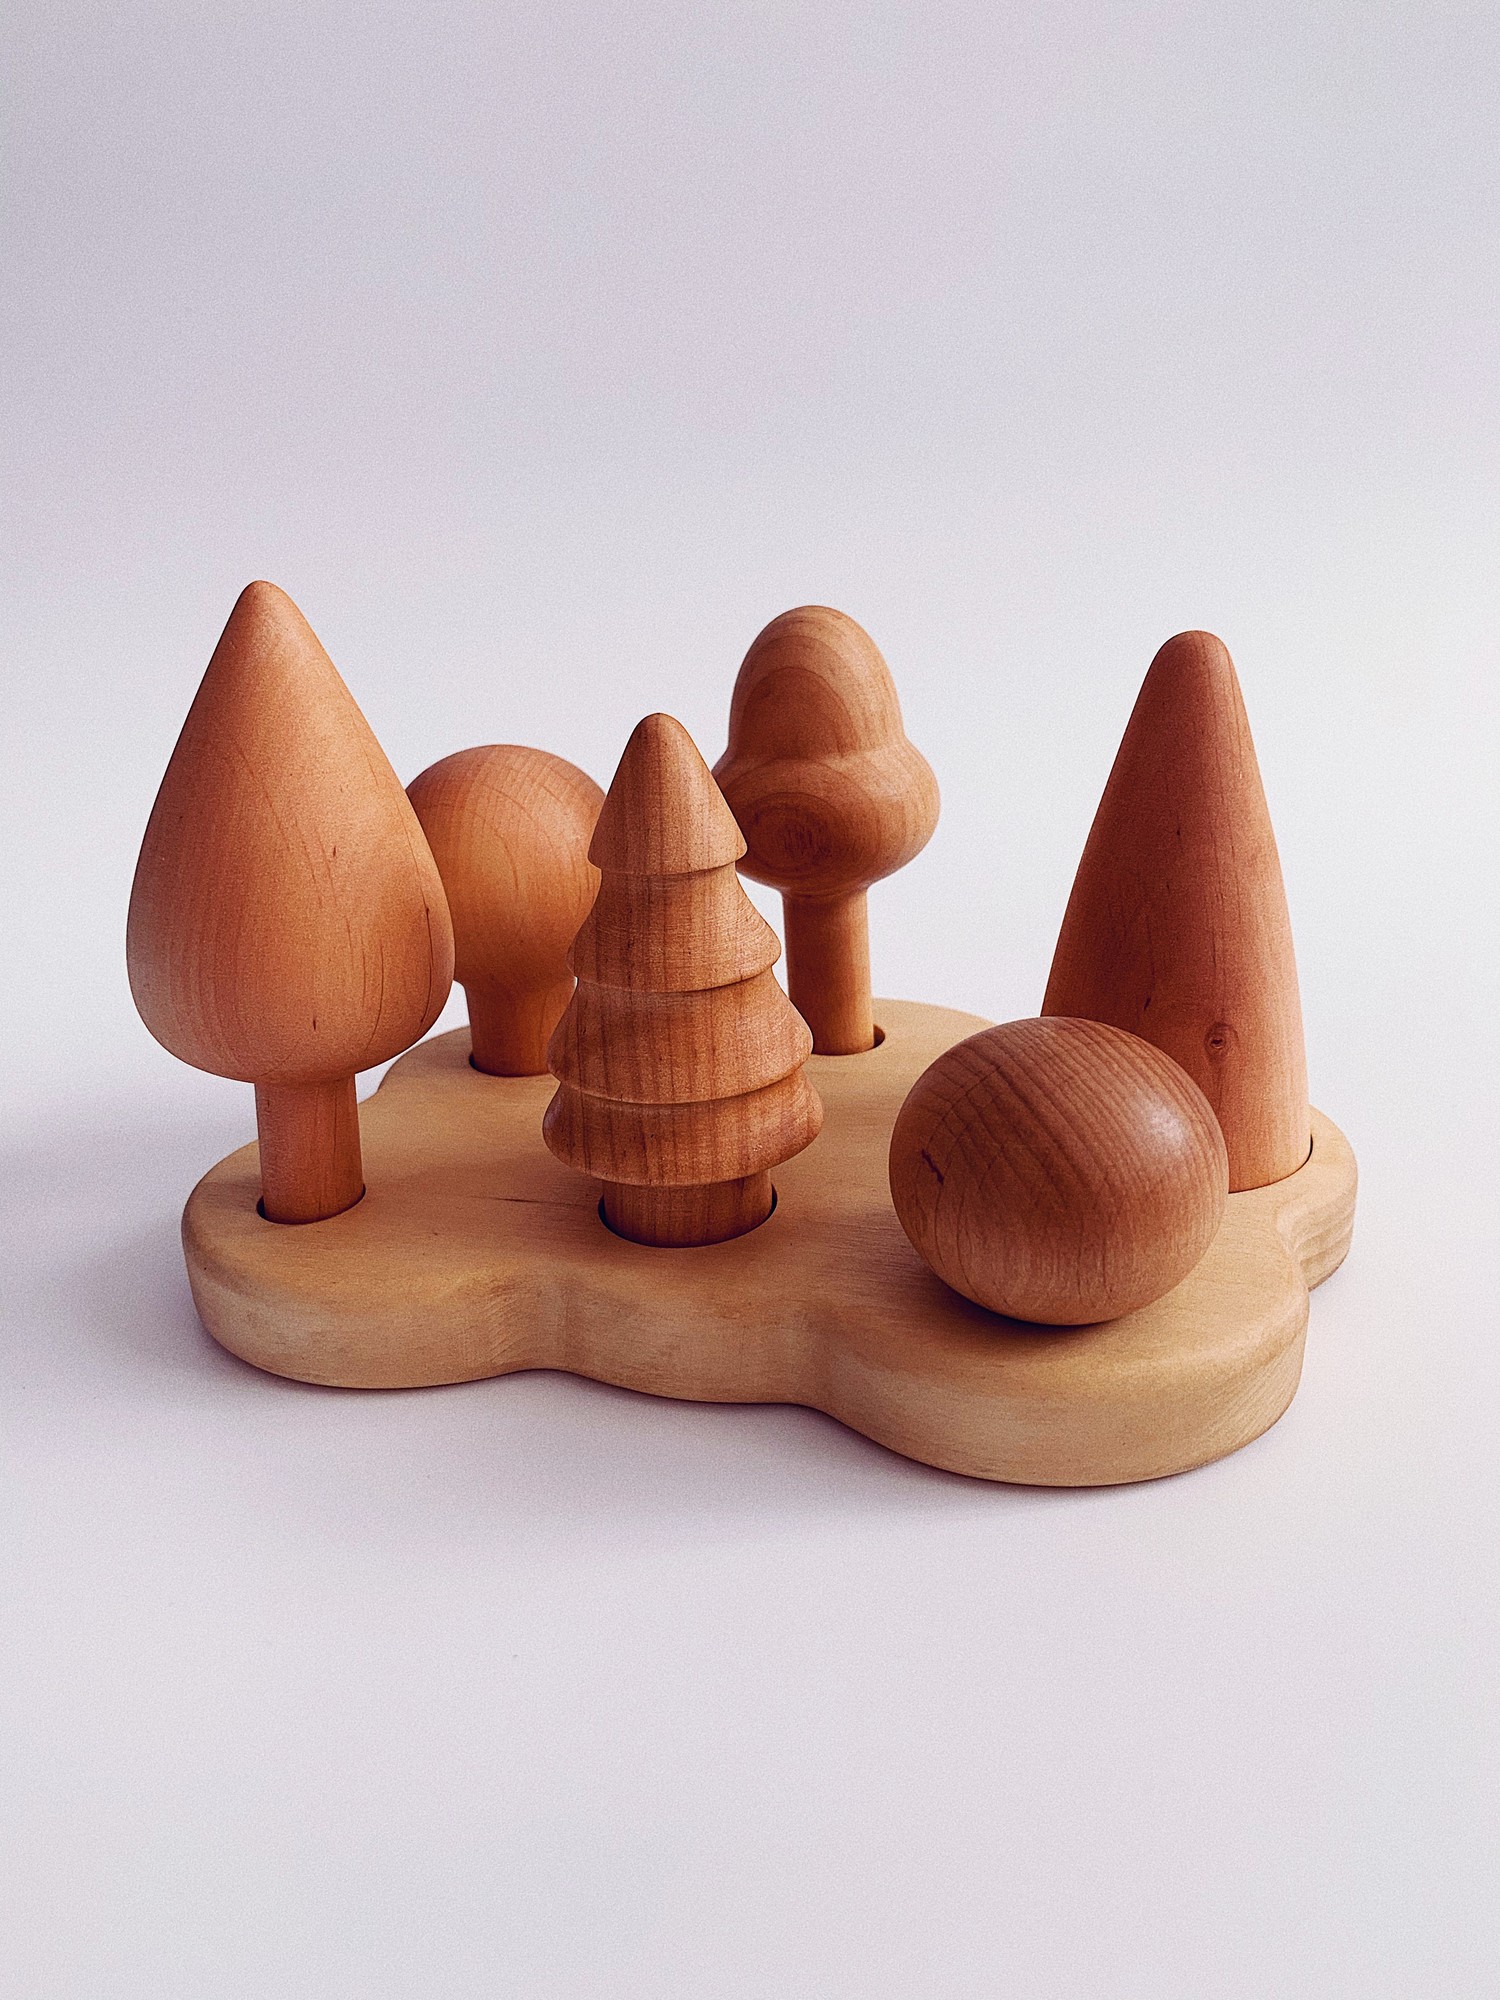 Educational toy "Forest"